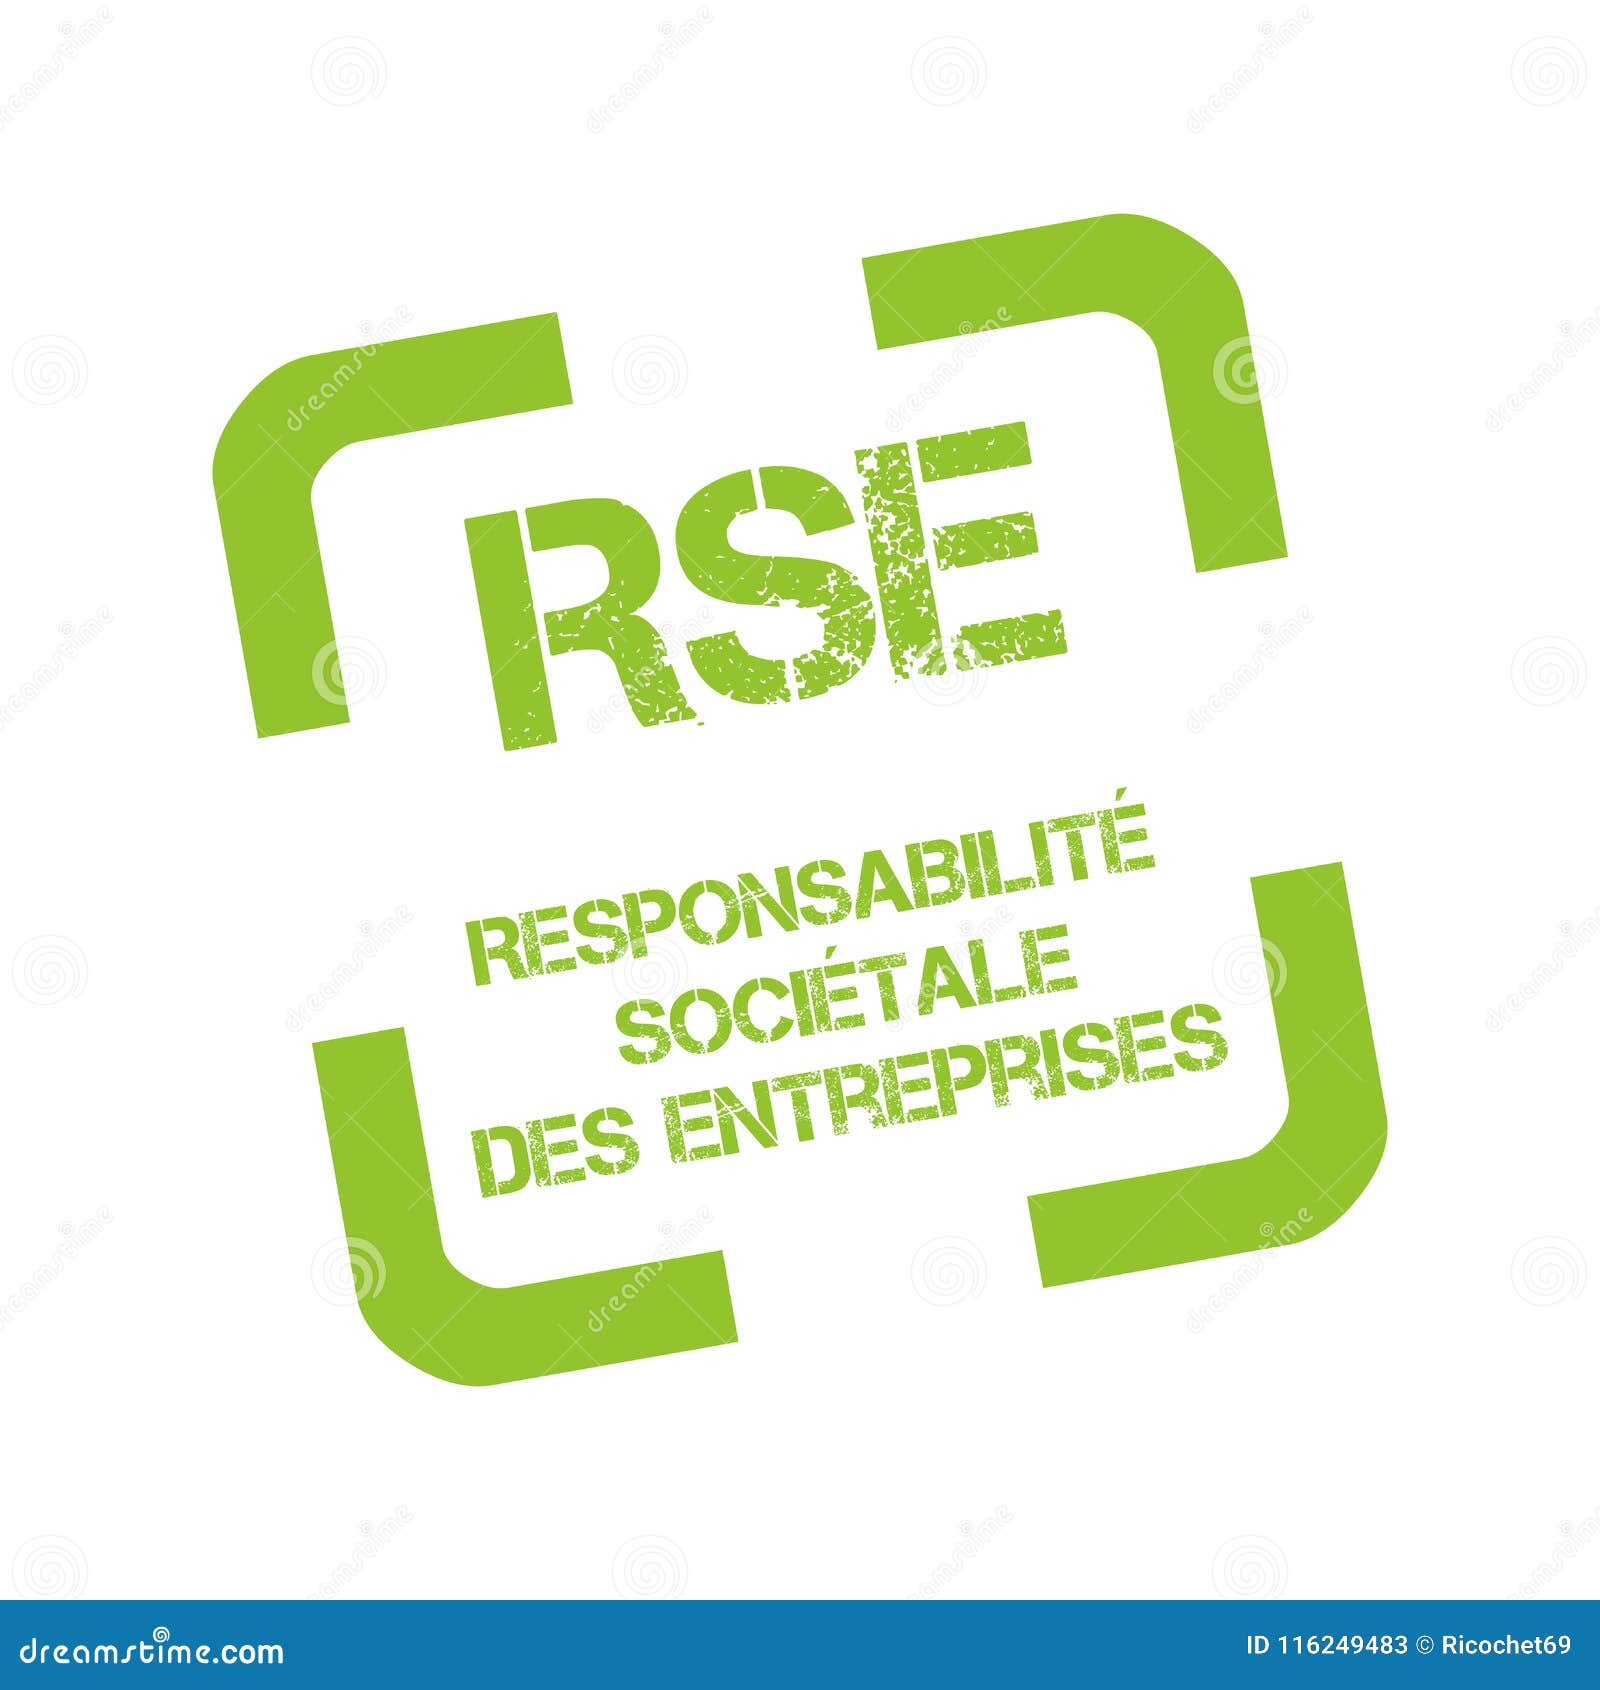 rubber stamp with corporate social responsibility called responsabilite societale entreprise in french